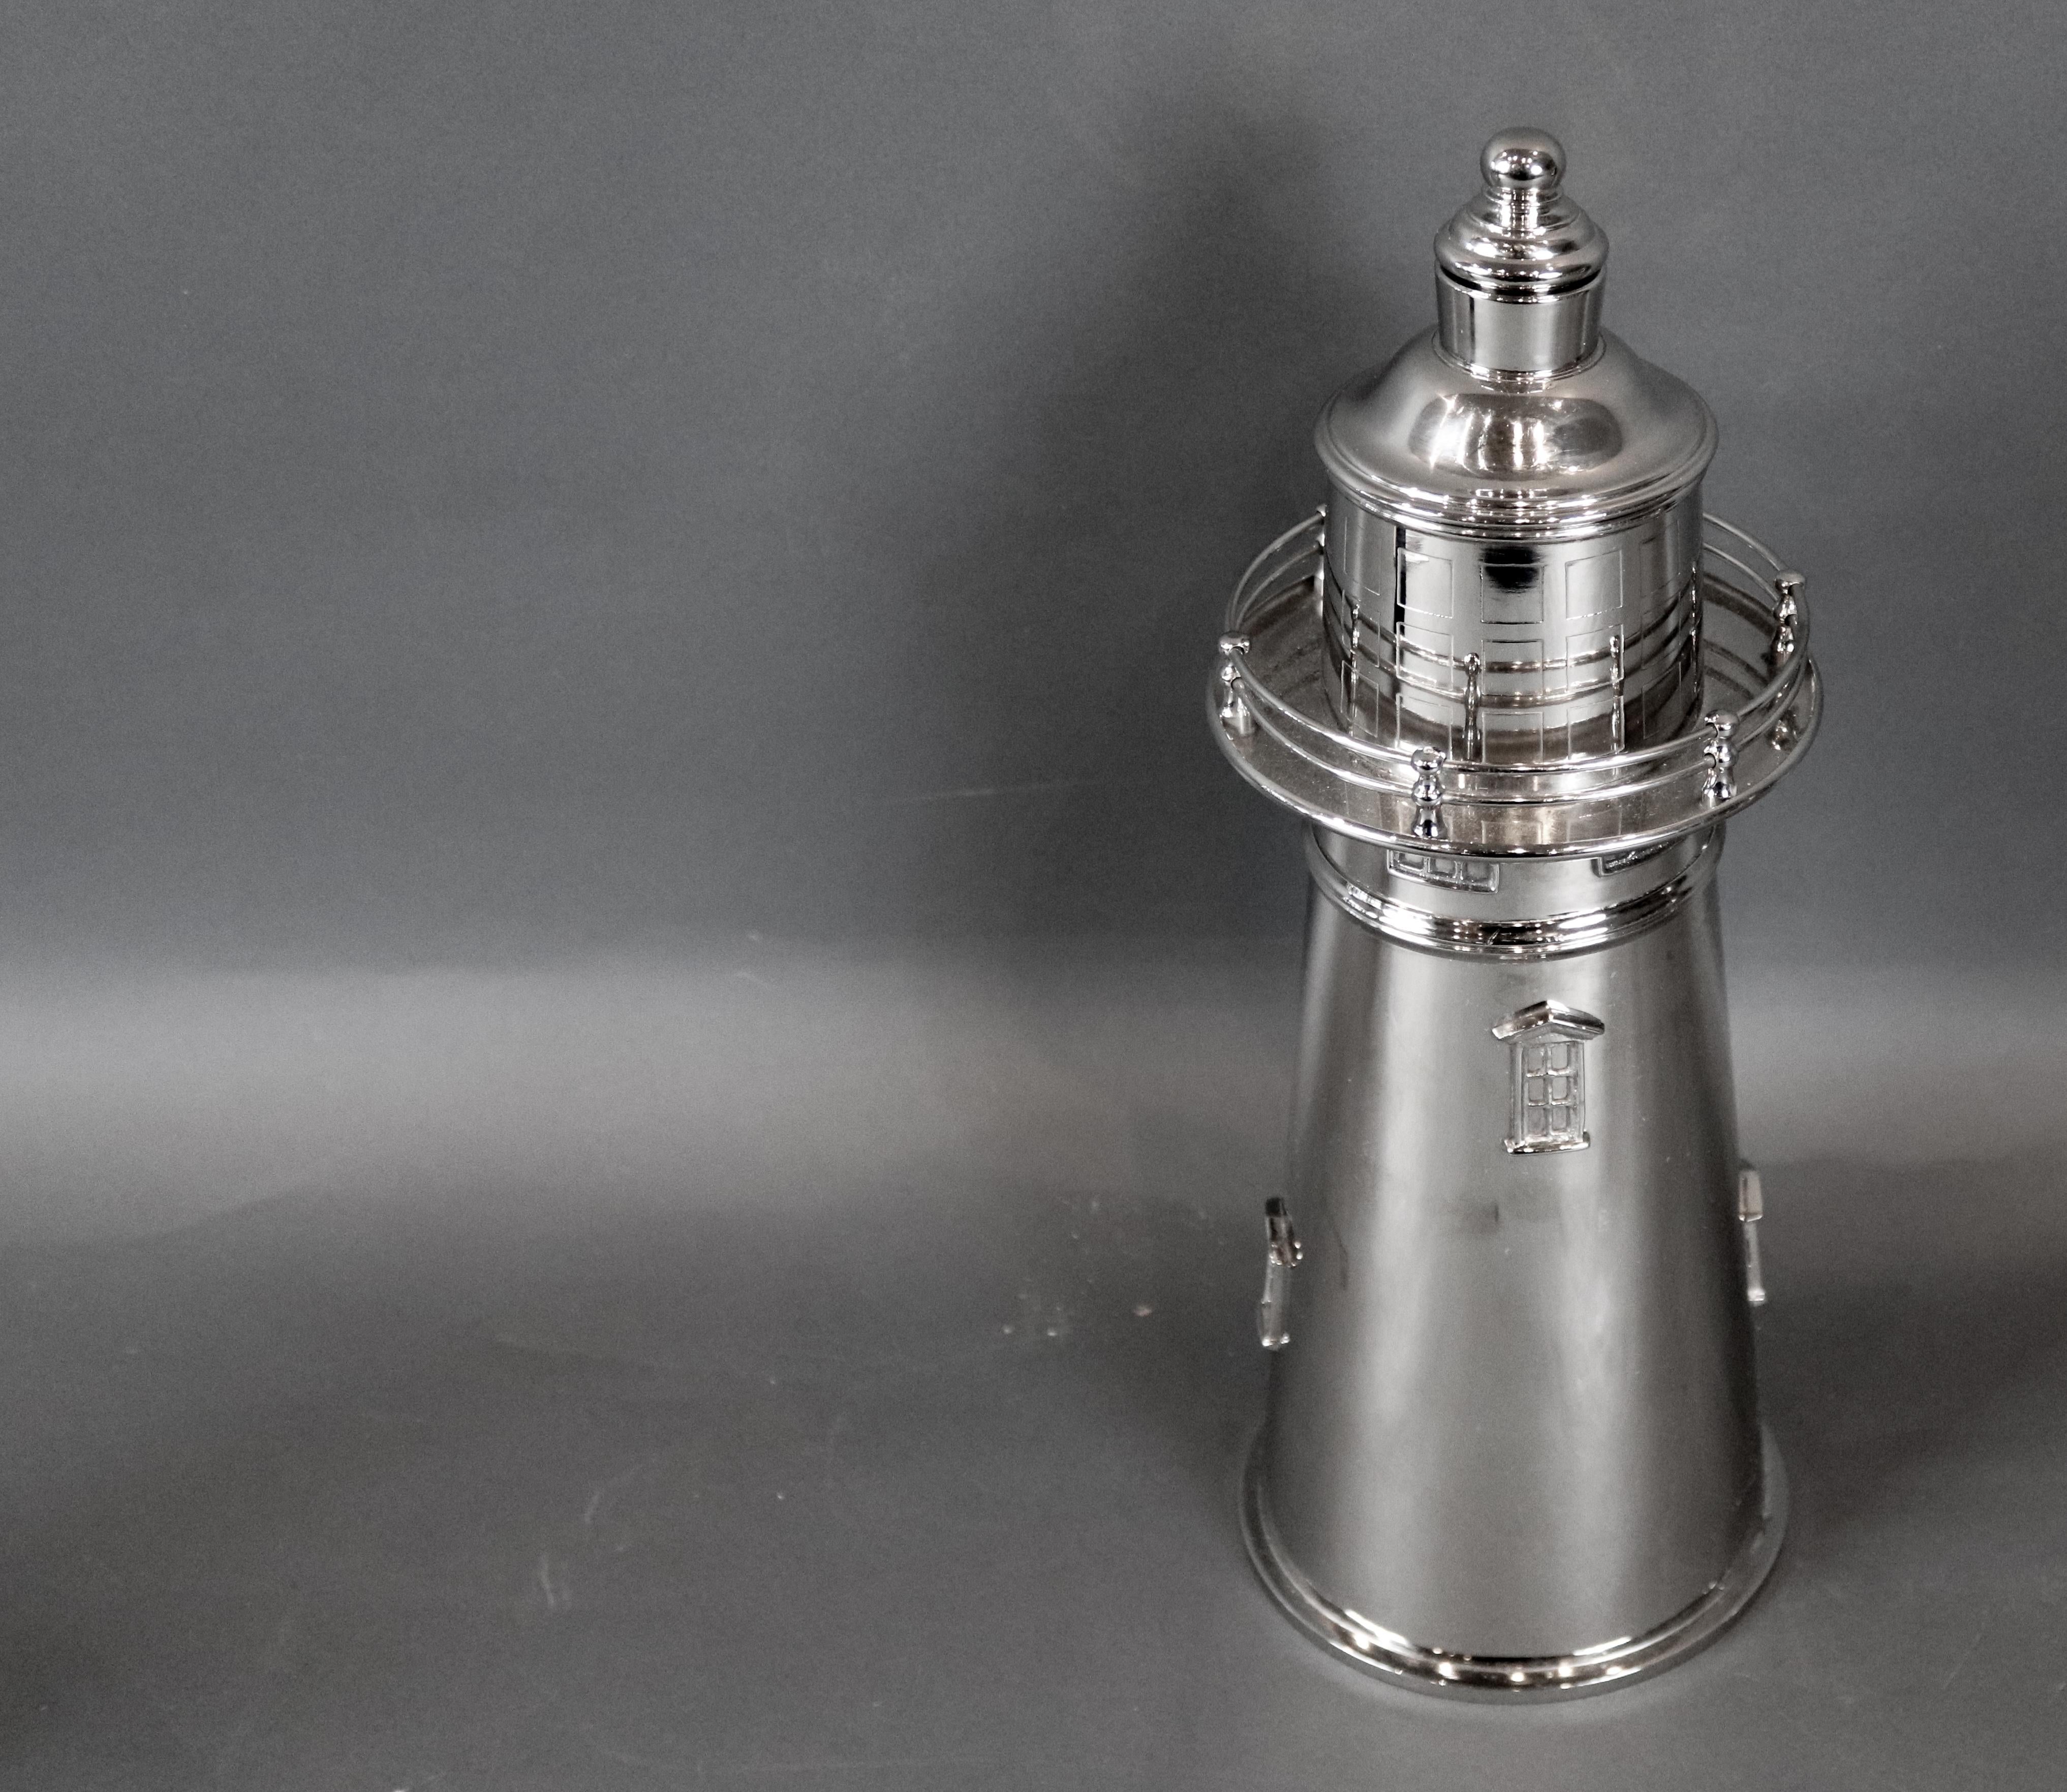 Chrome-plated cocktail shaker with removable top and strainer. With details including railing windows. Measures: 14